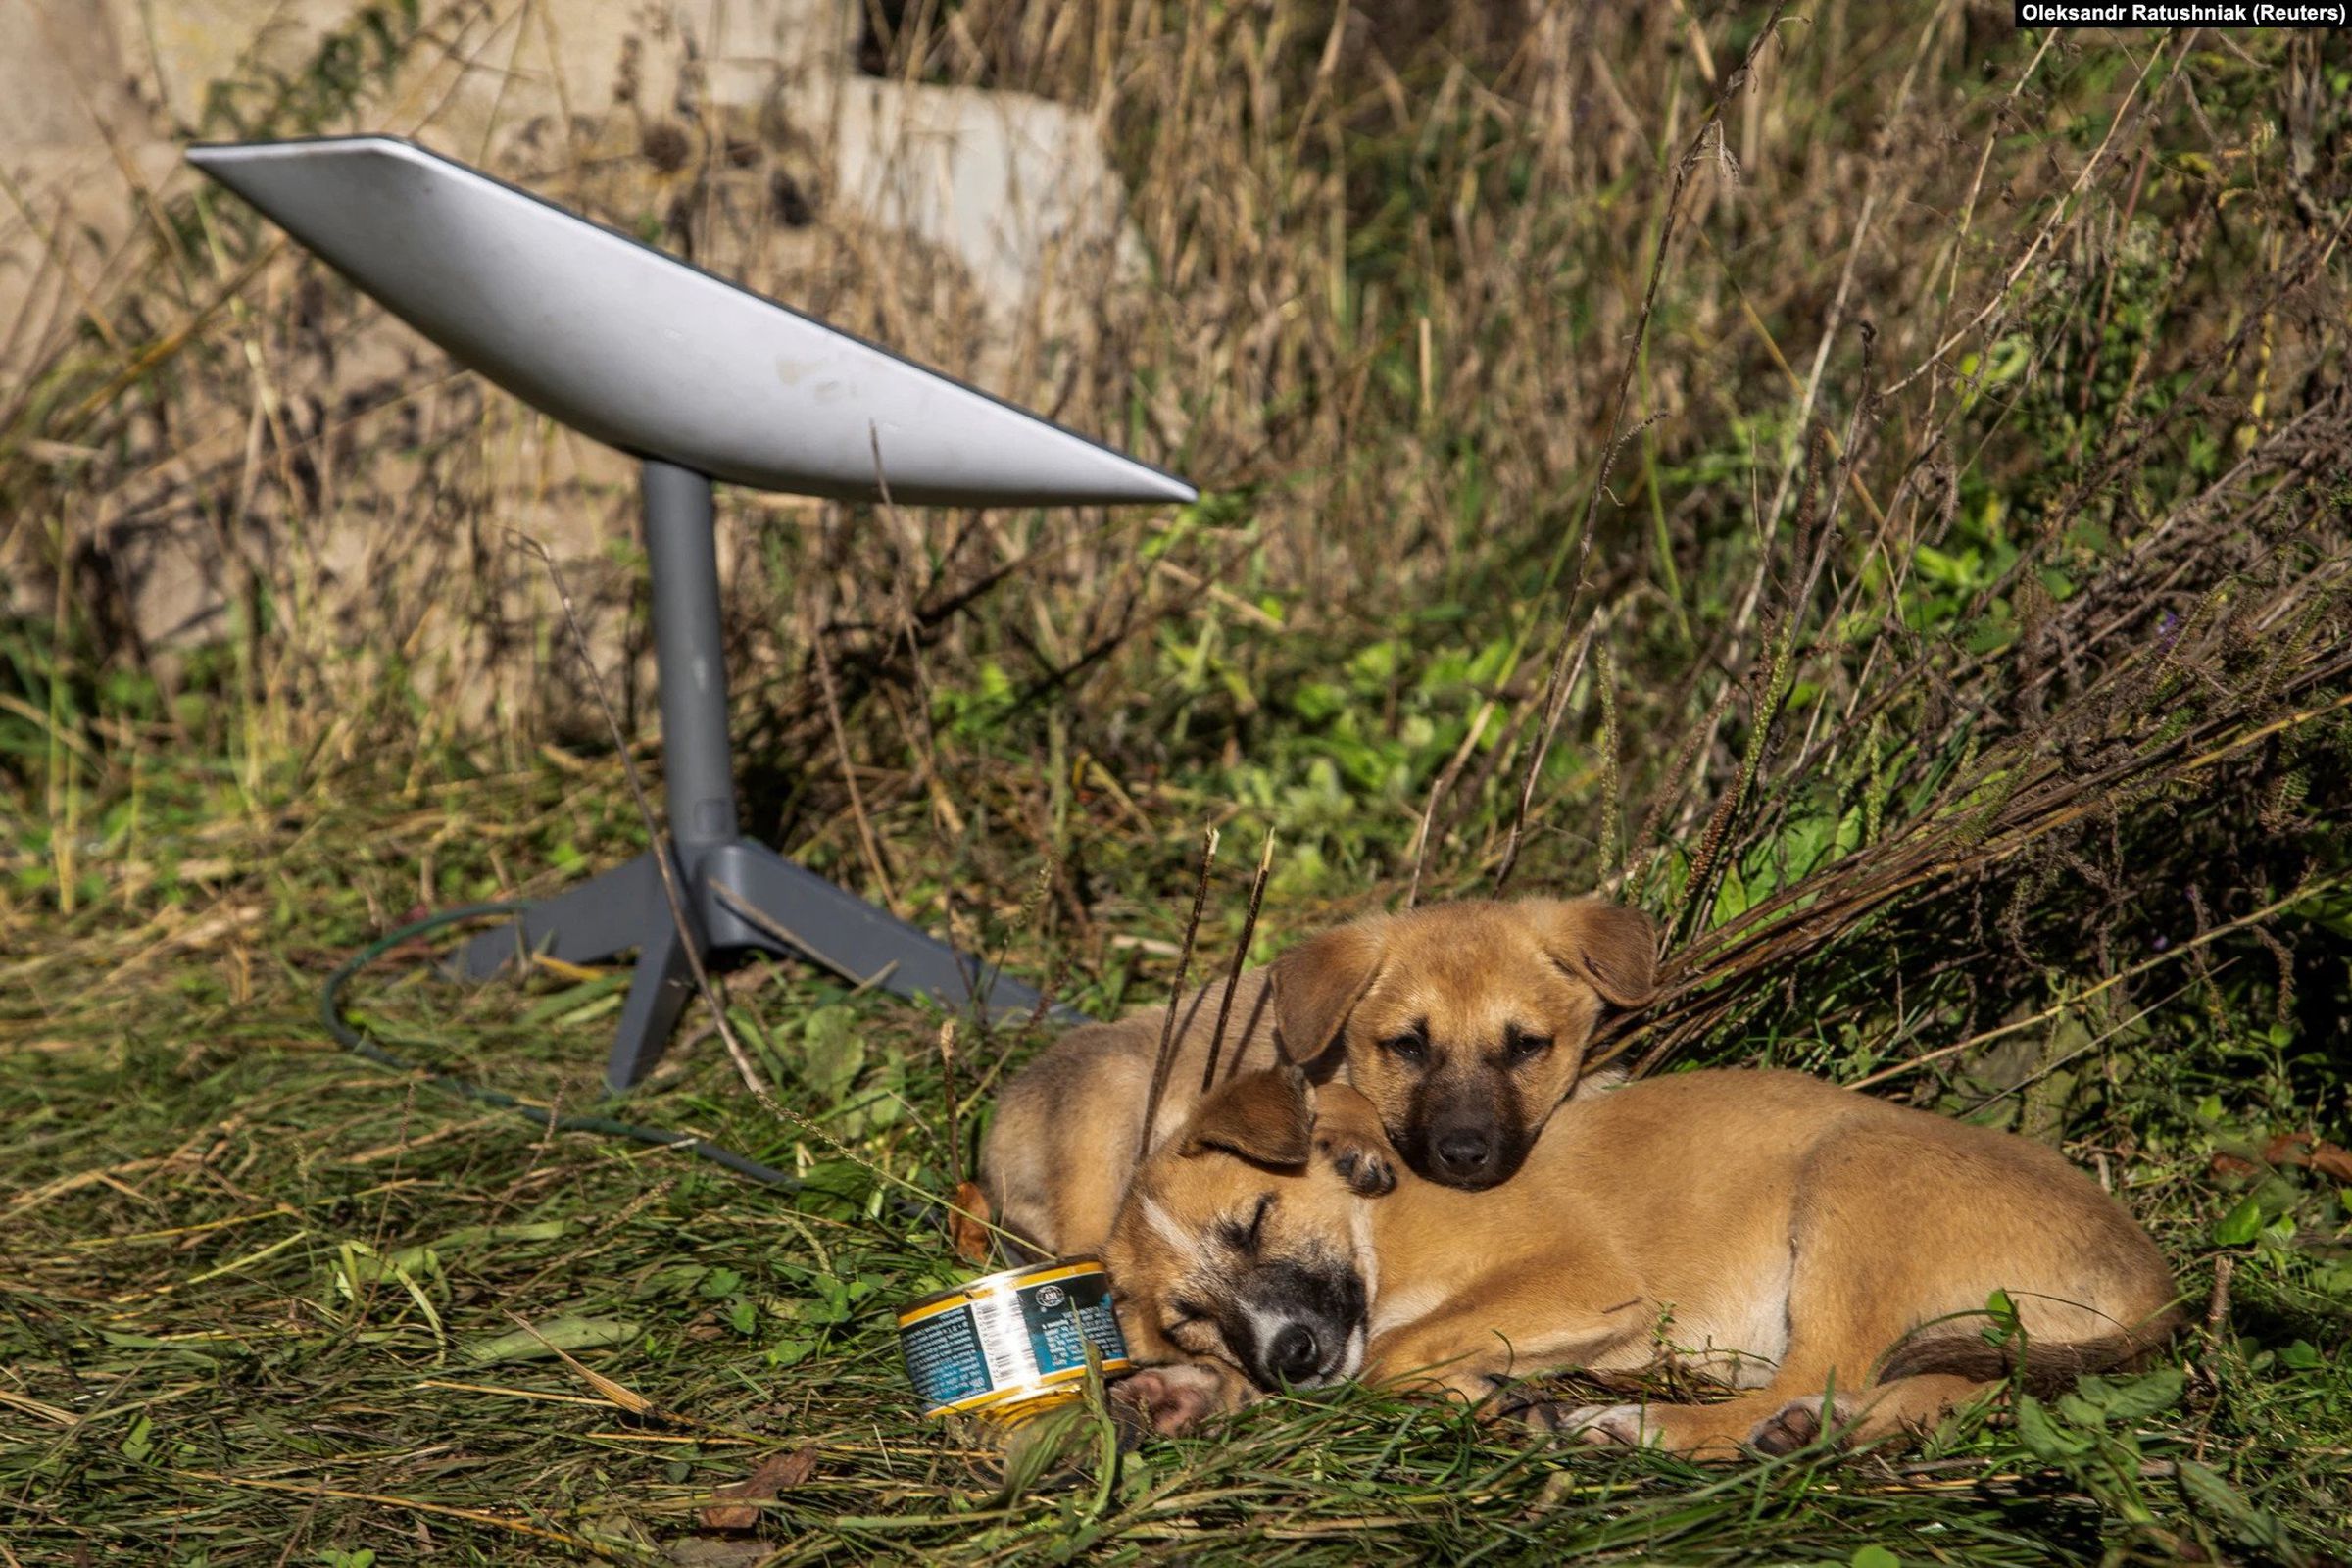 Puppies rest next to a Starlink terminal near the recently liberated town of Lyman, Ukraine.